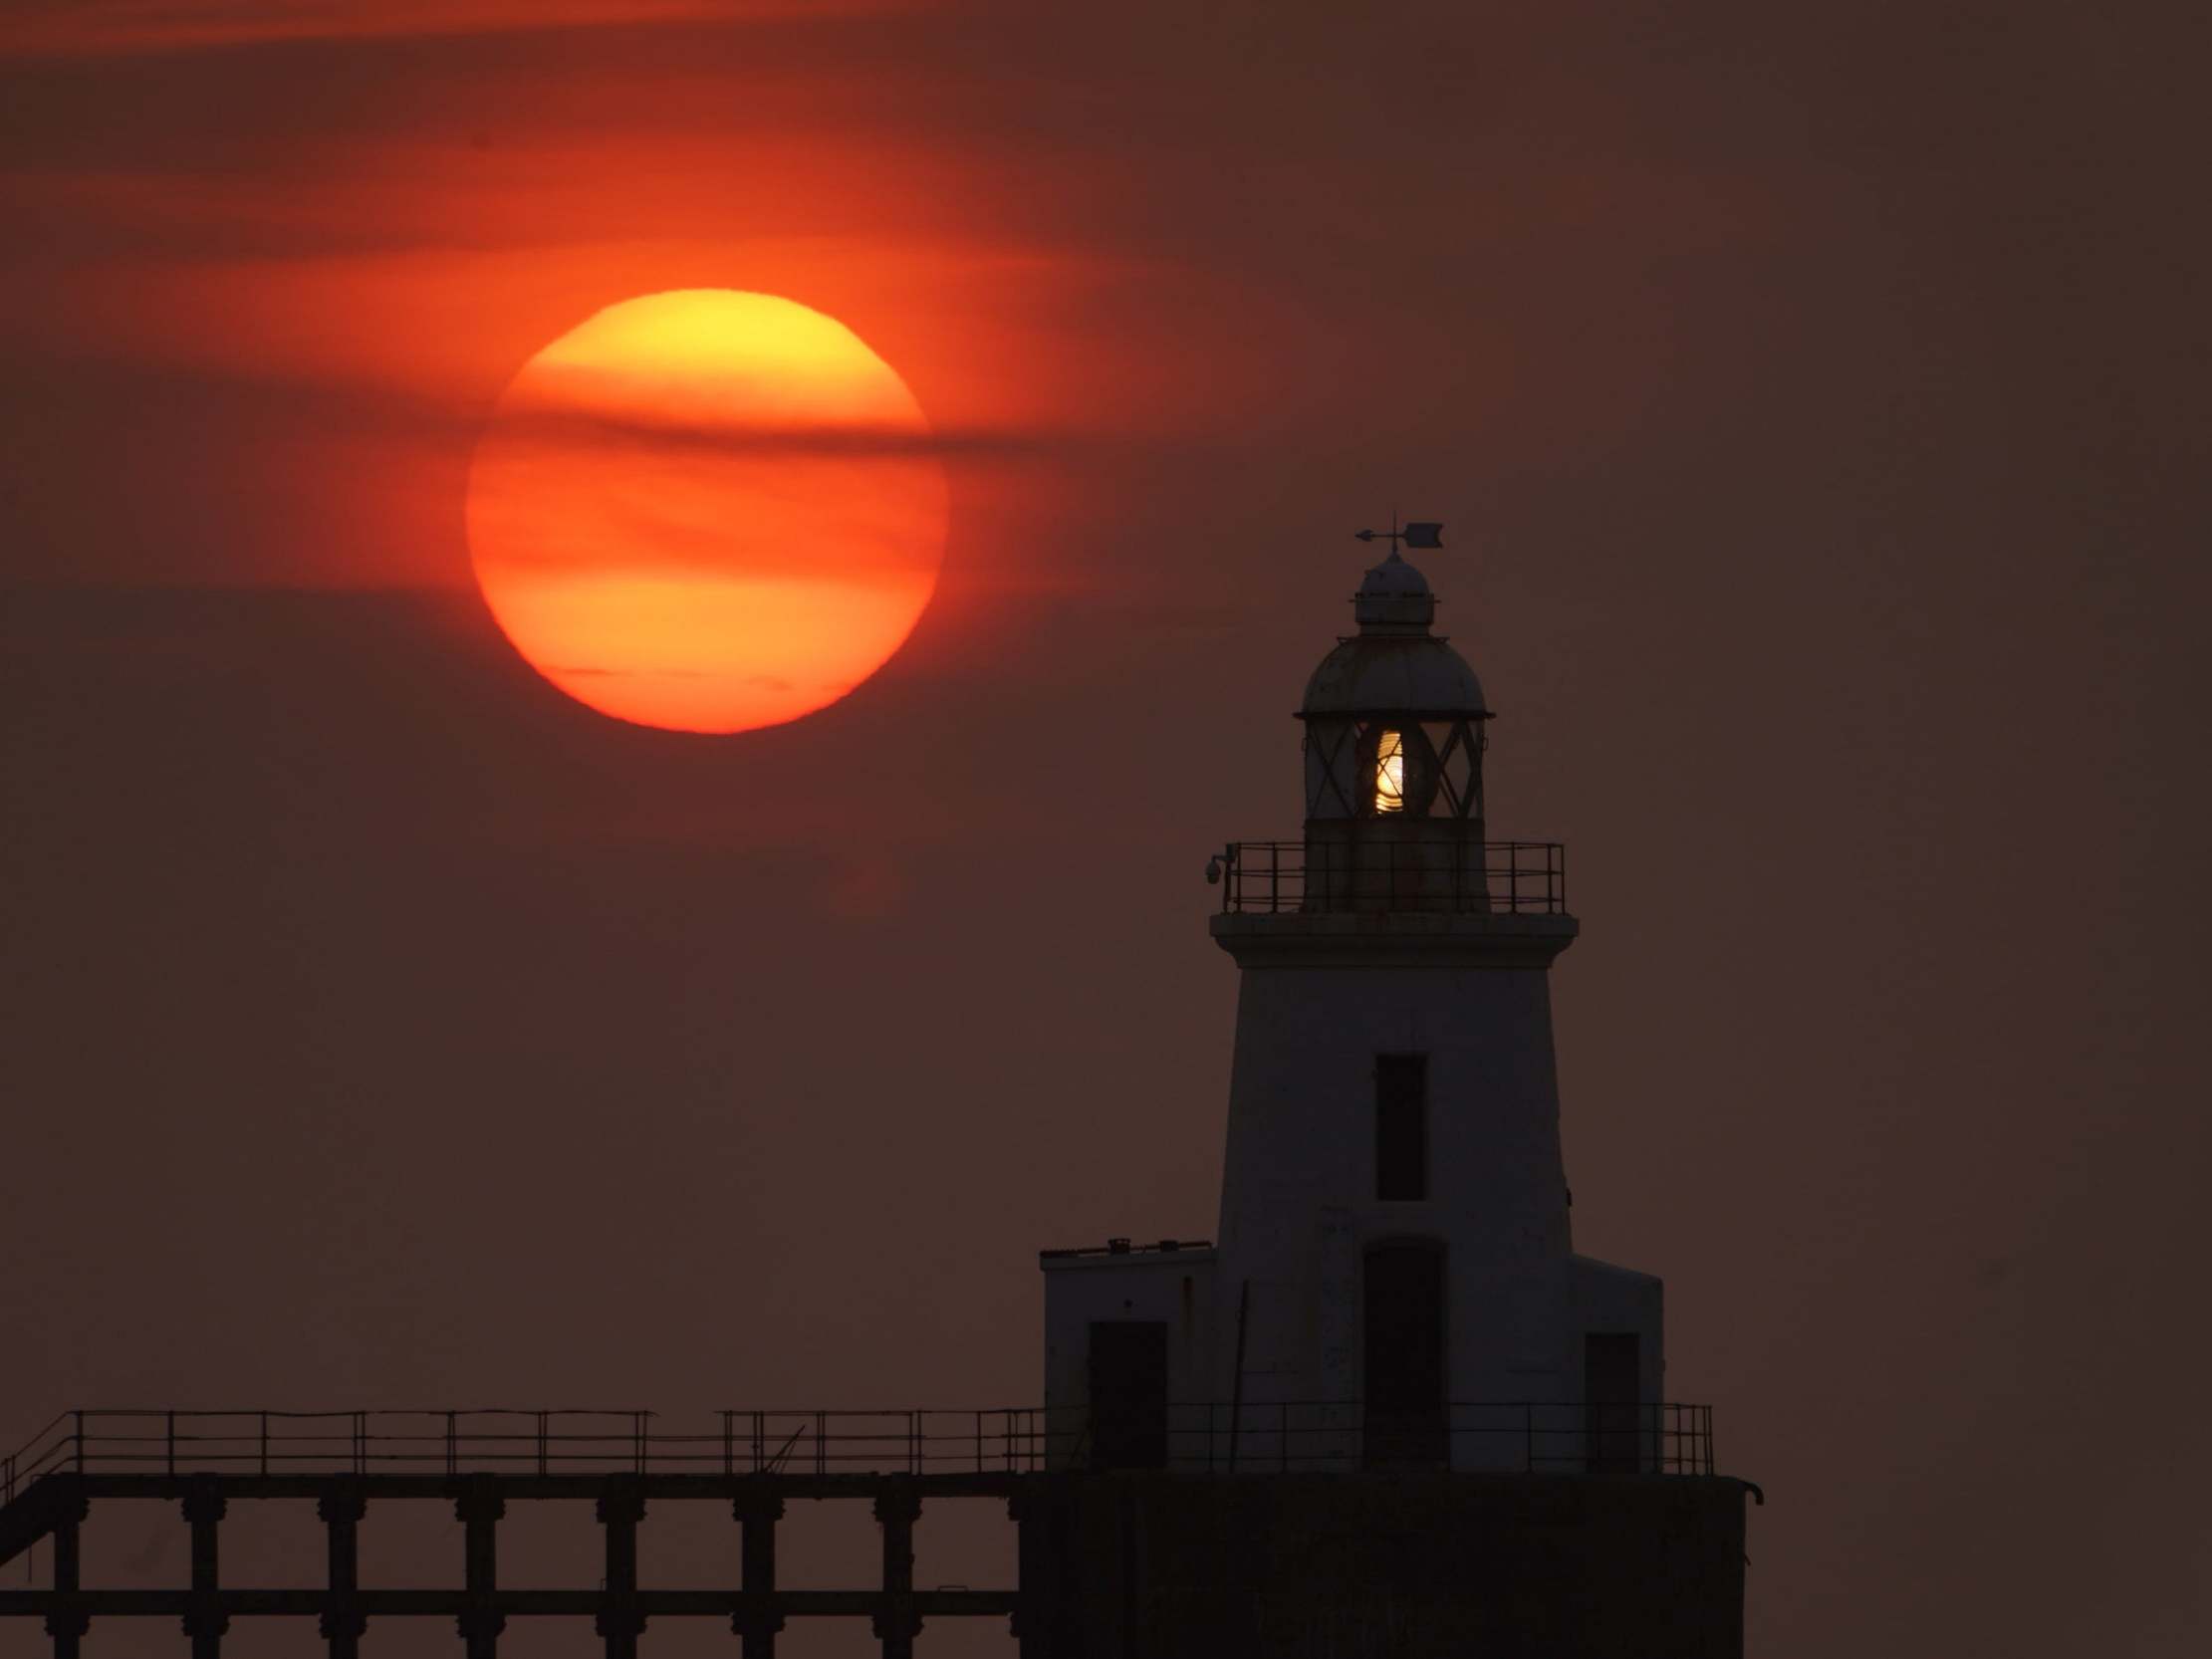 The Met Office has recorded four tropical nights so far this year with three occurring in the last three days